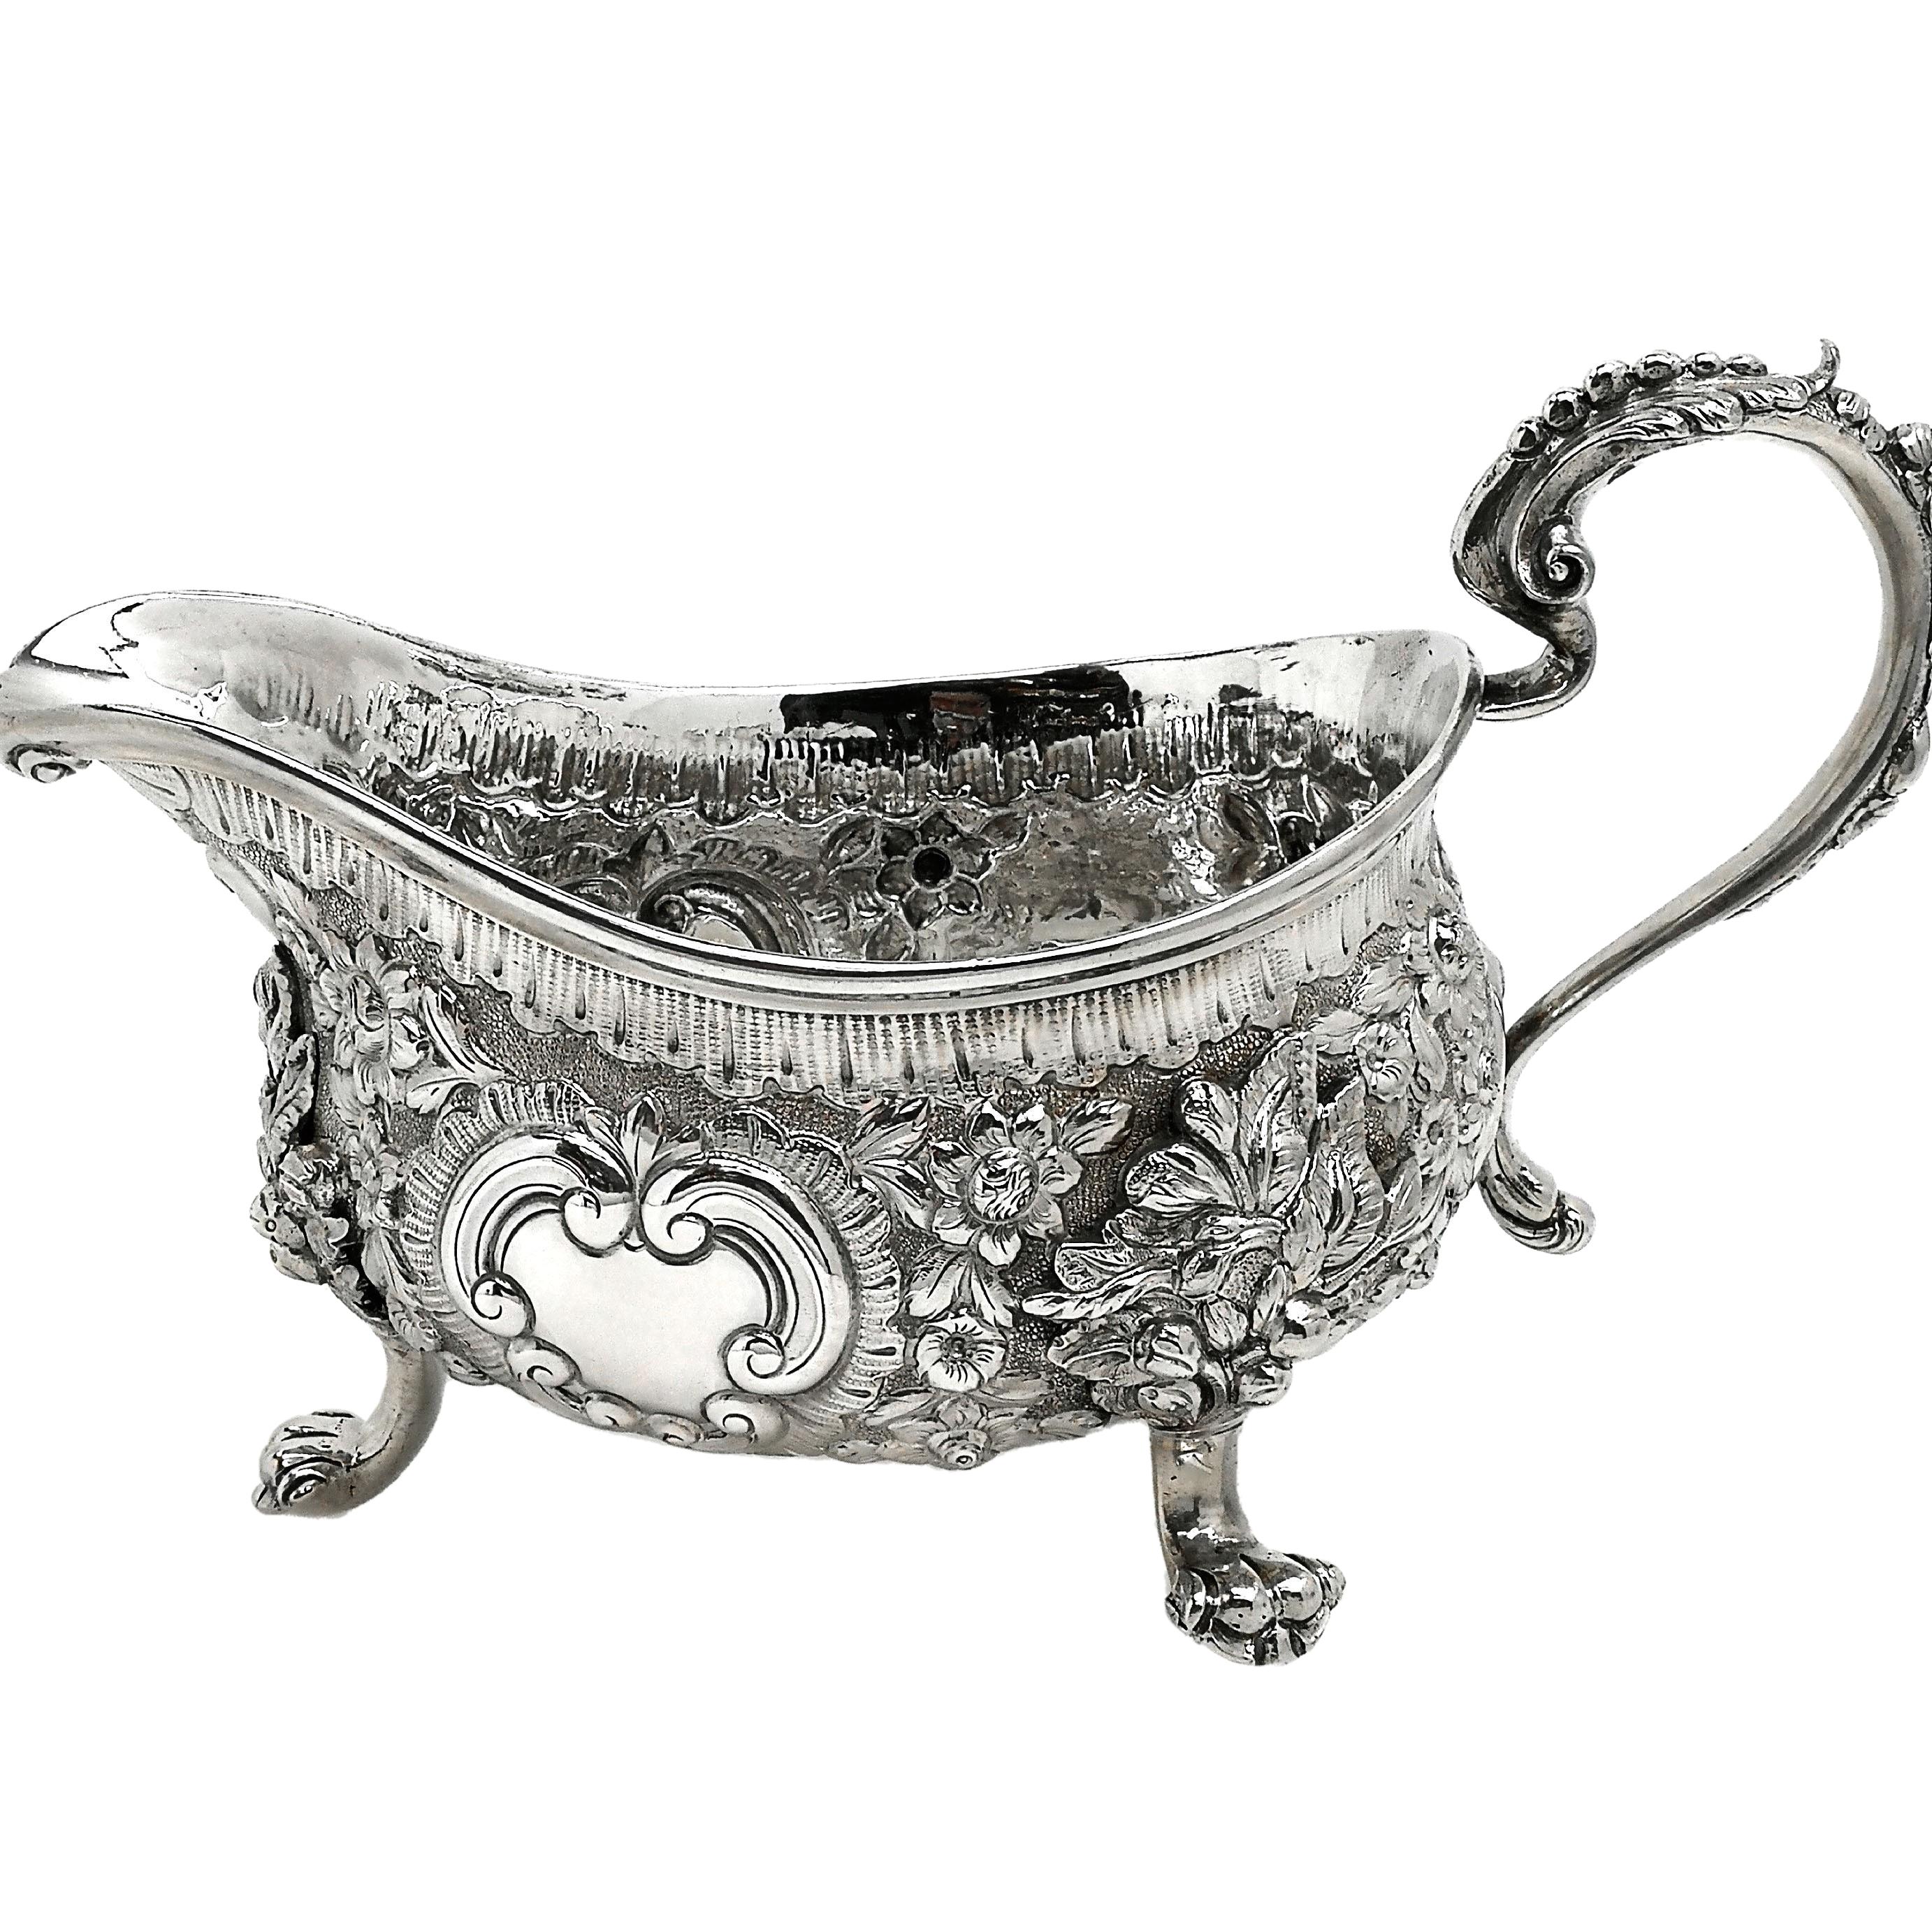 19th Century Pair of Georgian Sterling Silver Sauce Boats / Gravy Jugs George IV, 1820 For Sale